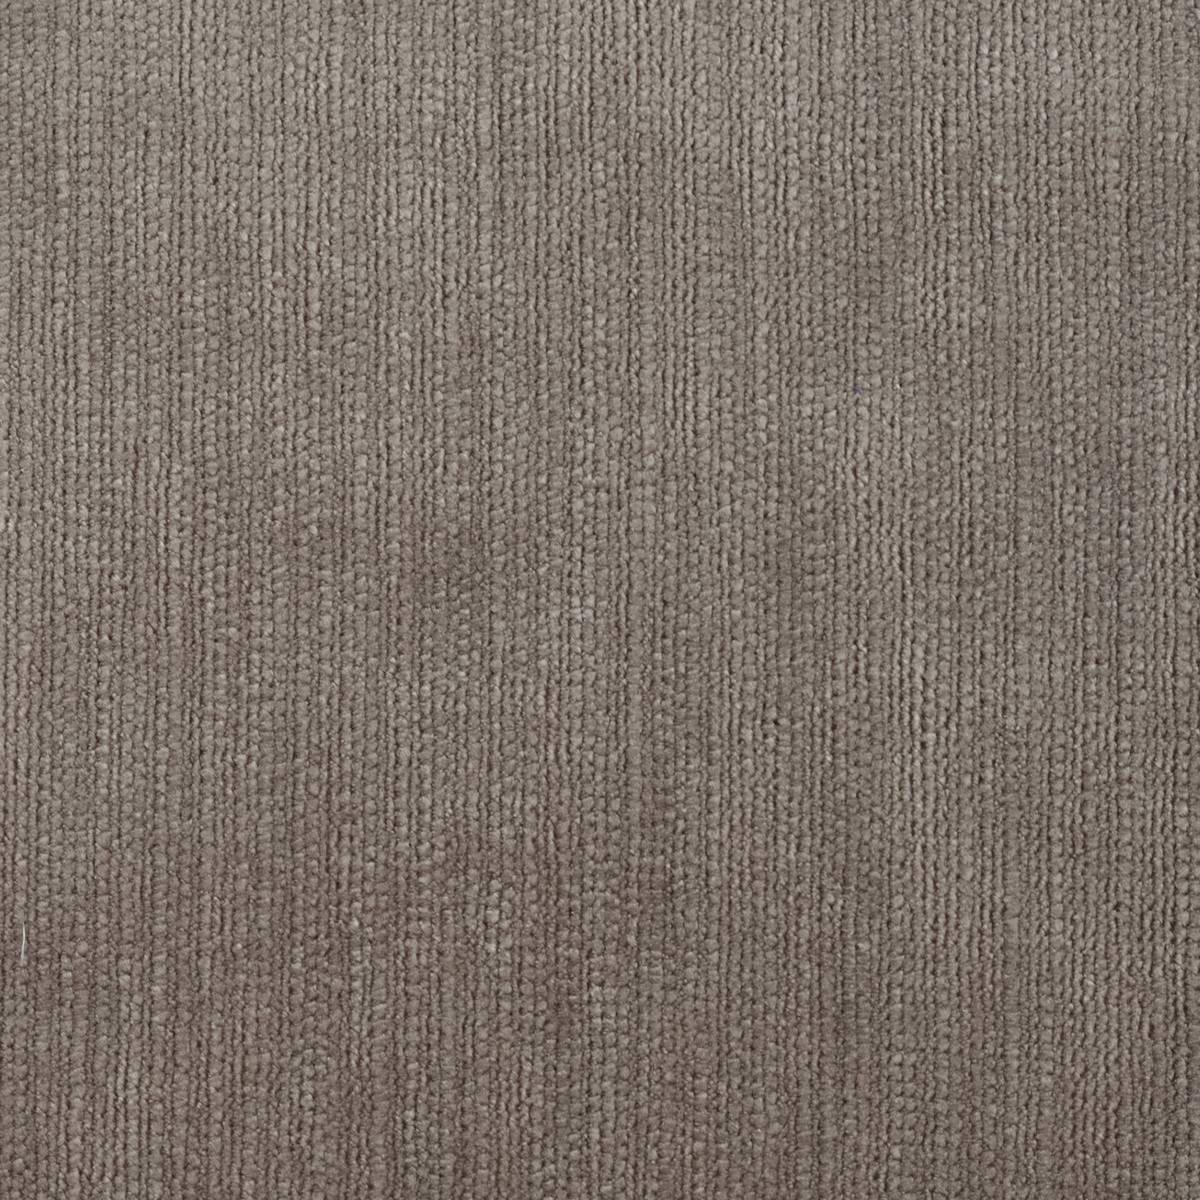 Momentum Velvets Taupe Fabric by Harlequin